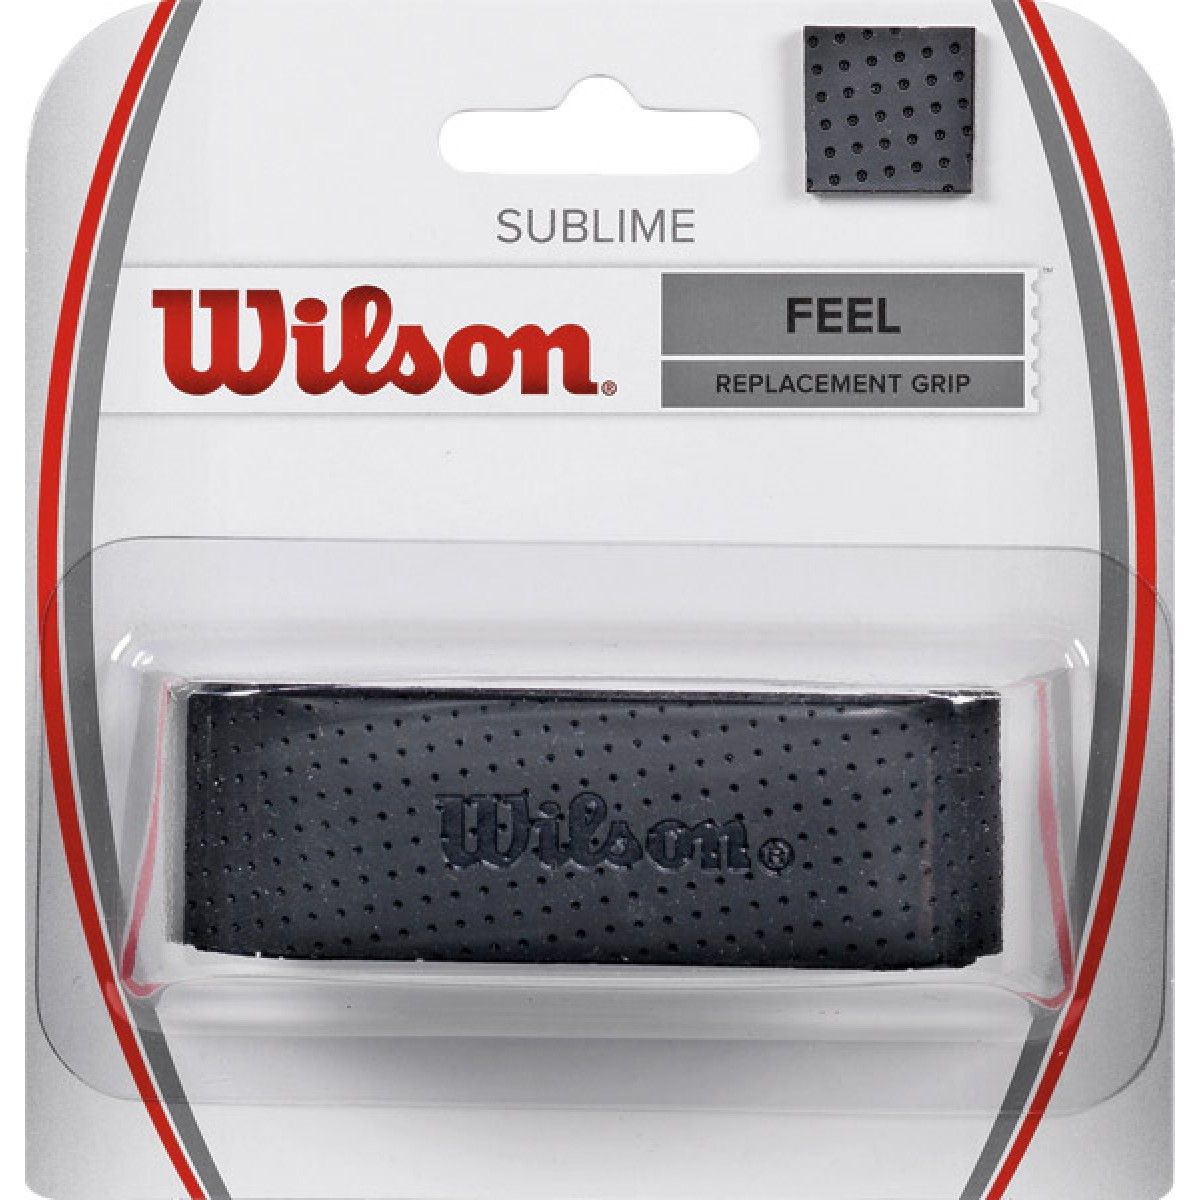 Wilson Sublime Replacement Grip WRZ4202